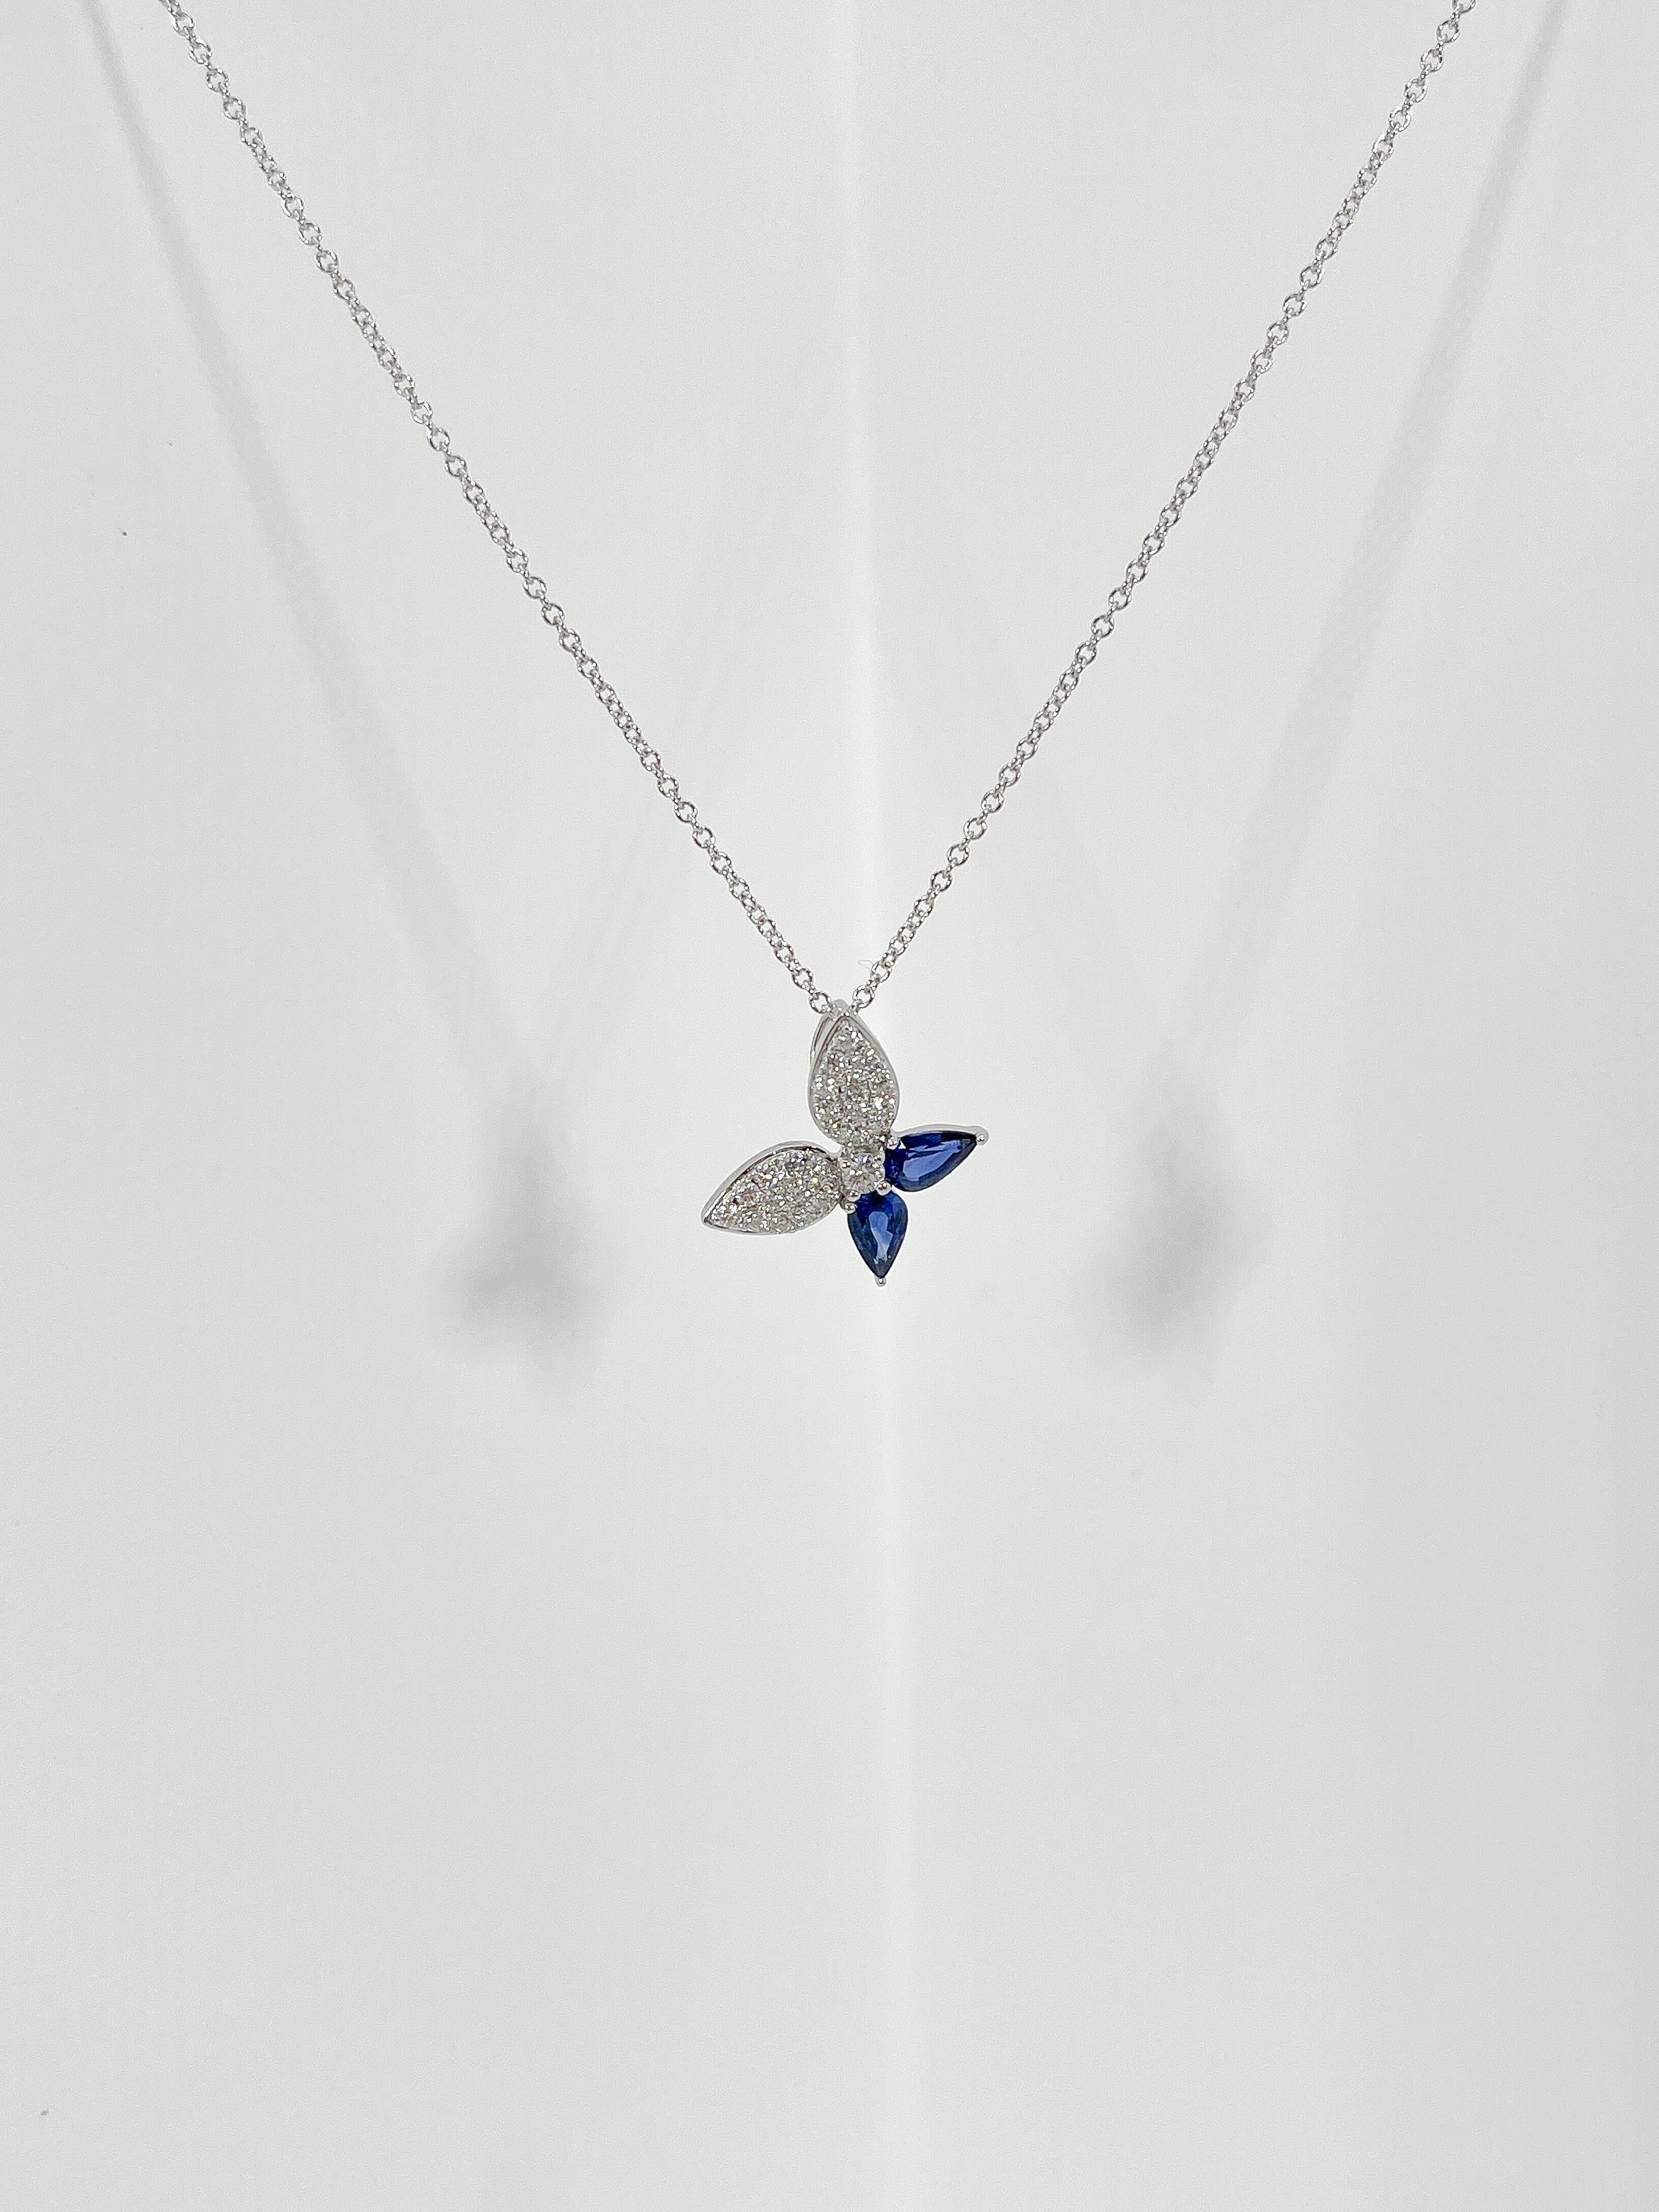 Zeghani 14k white gold sapphire and diamond pendant necklace. The diamonds in this necklace are all round, has a lobster clasp to open and close, the sapphires are pear shaped, the length of the necklace is 19 inches, the width of the pendant is 13